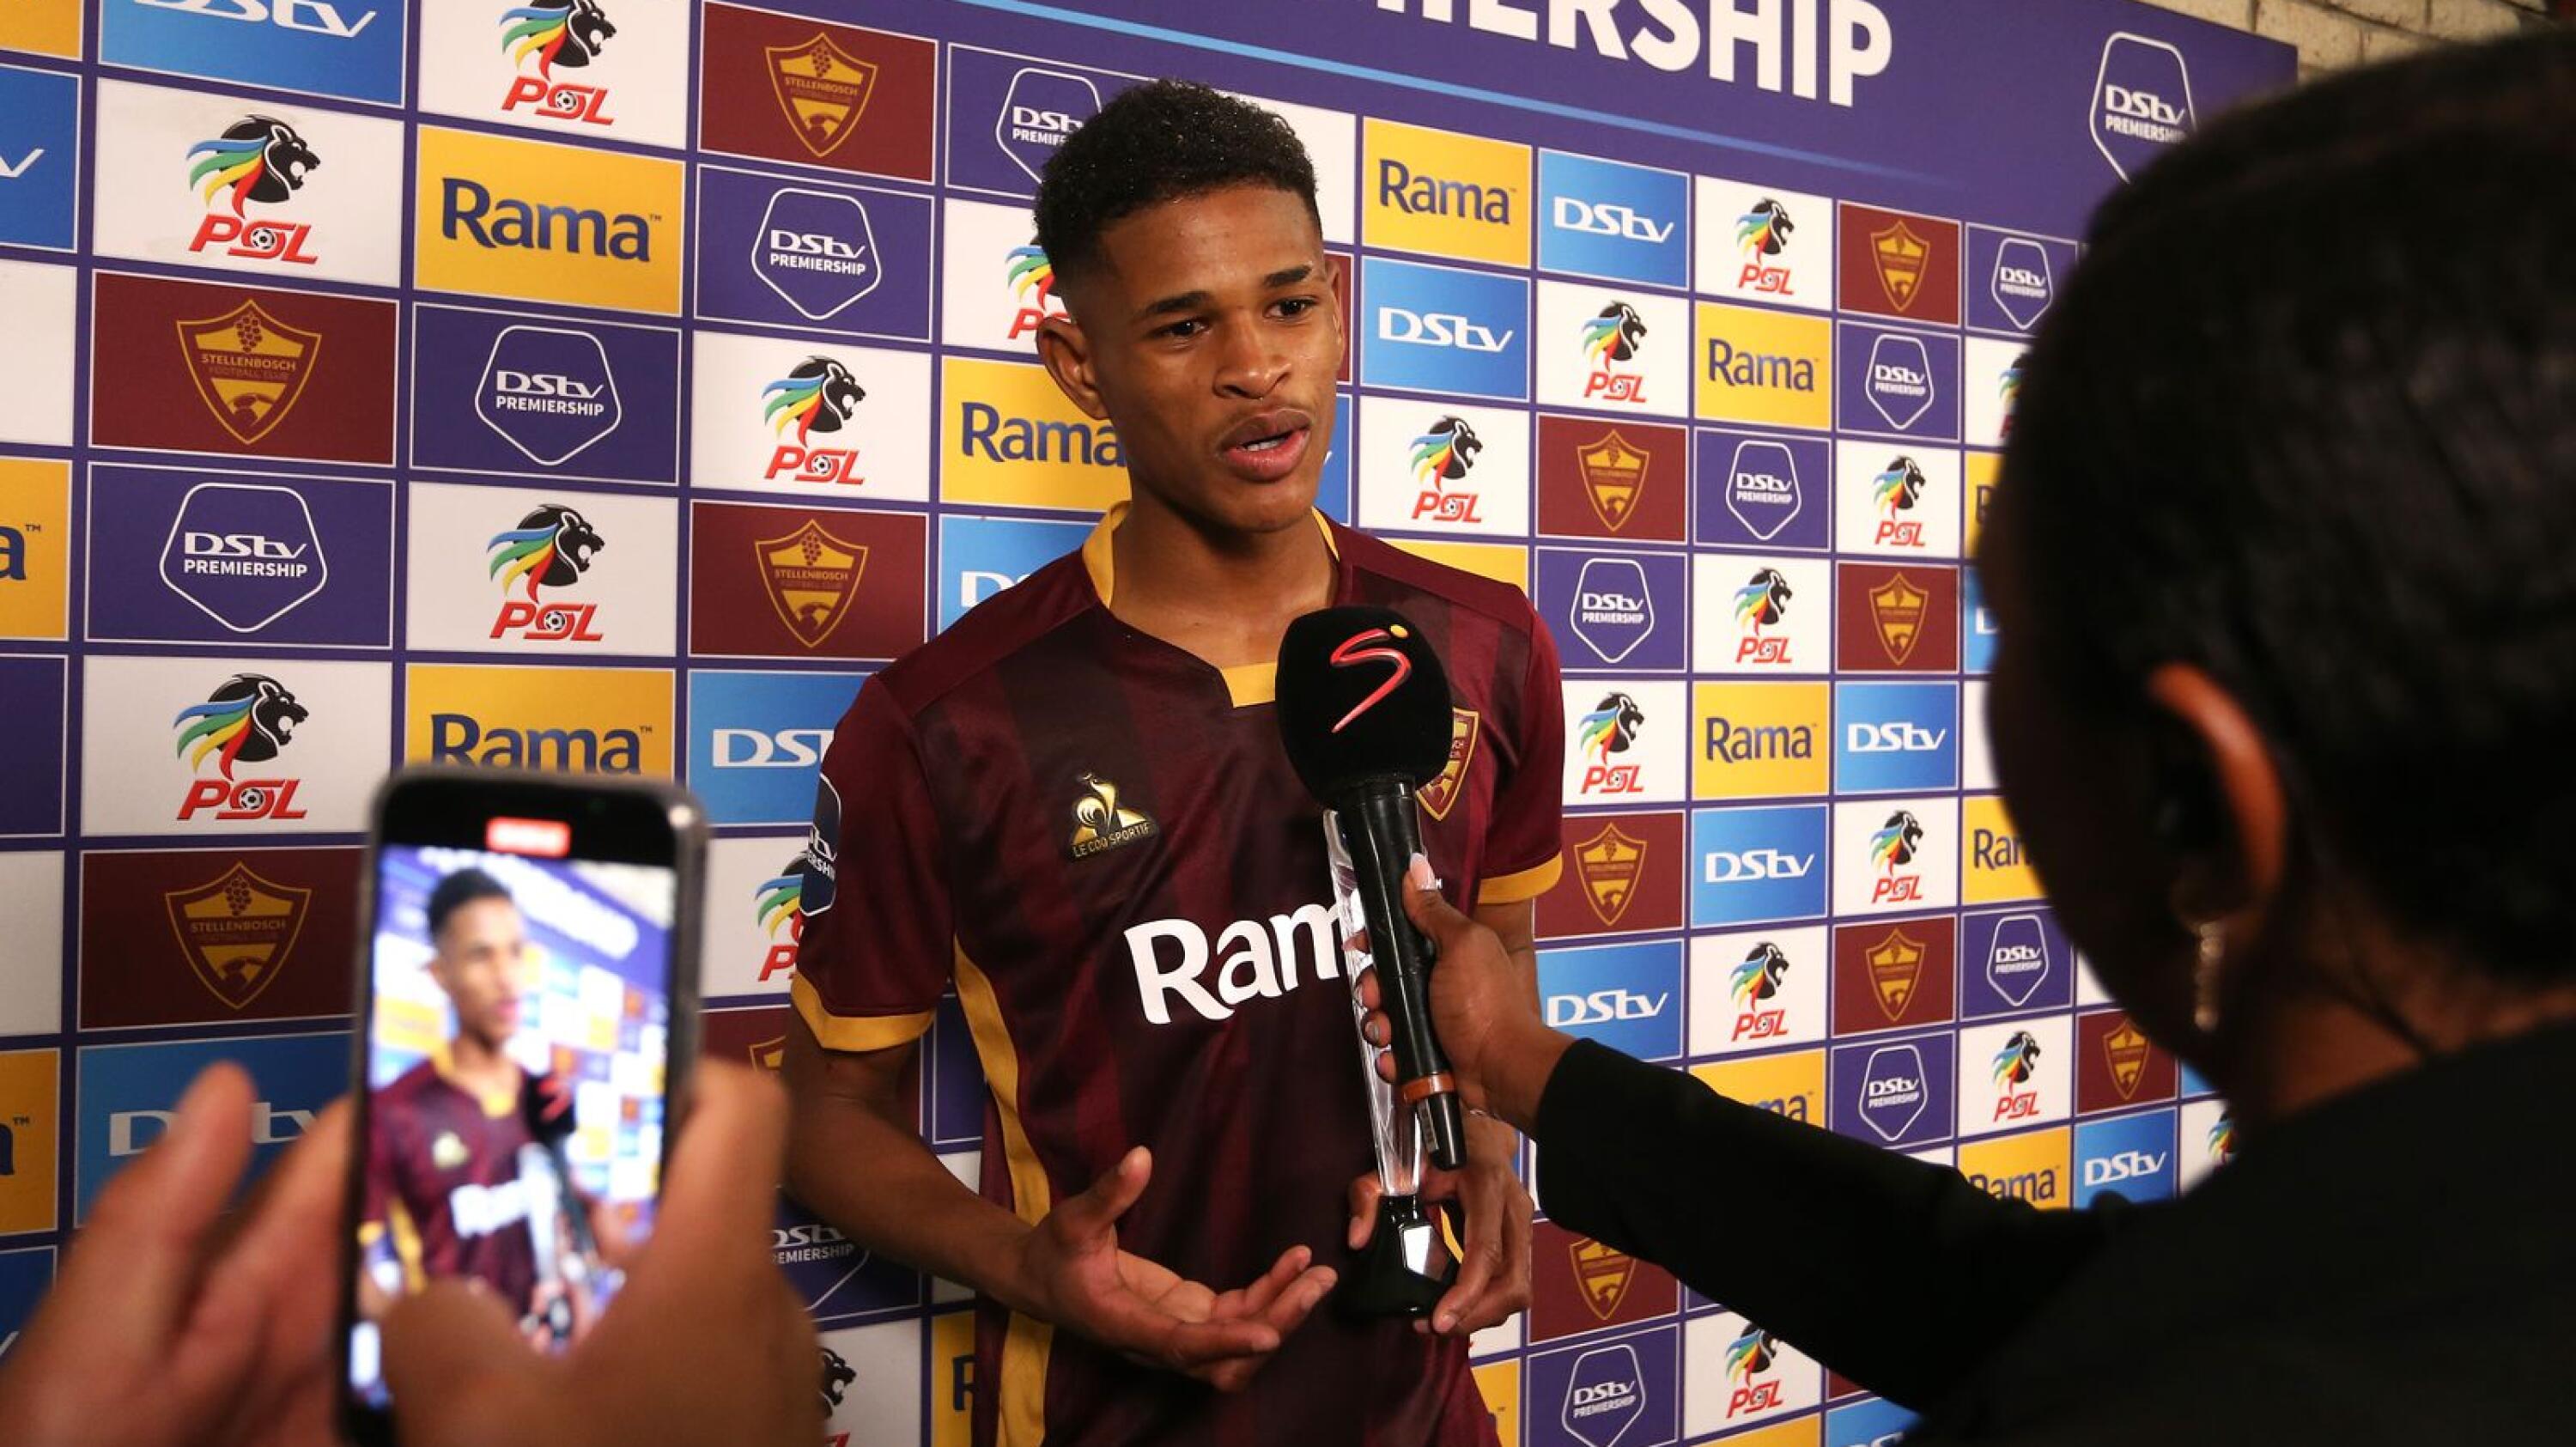 Oshwin Andries was named Man of the Match after Stellenbosch FC’s DStv Premiership match against Orlando Pirates earlier this season